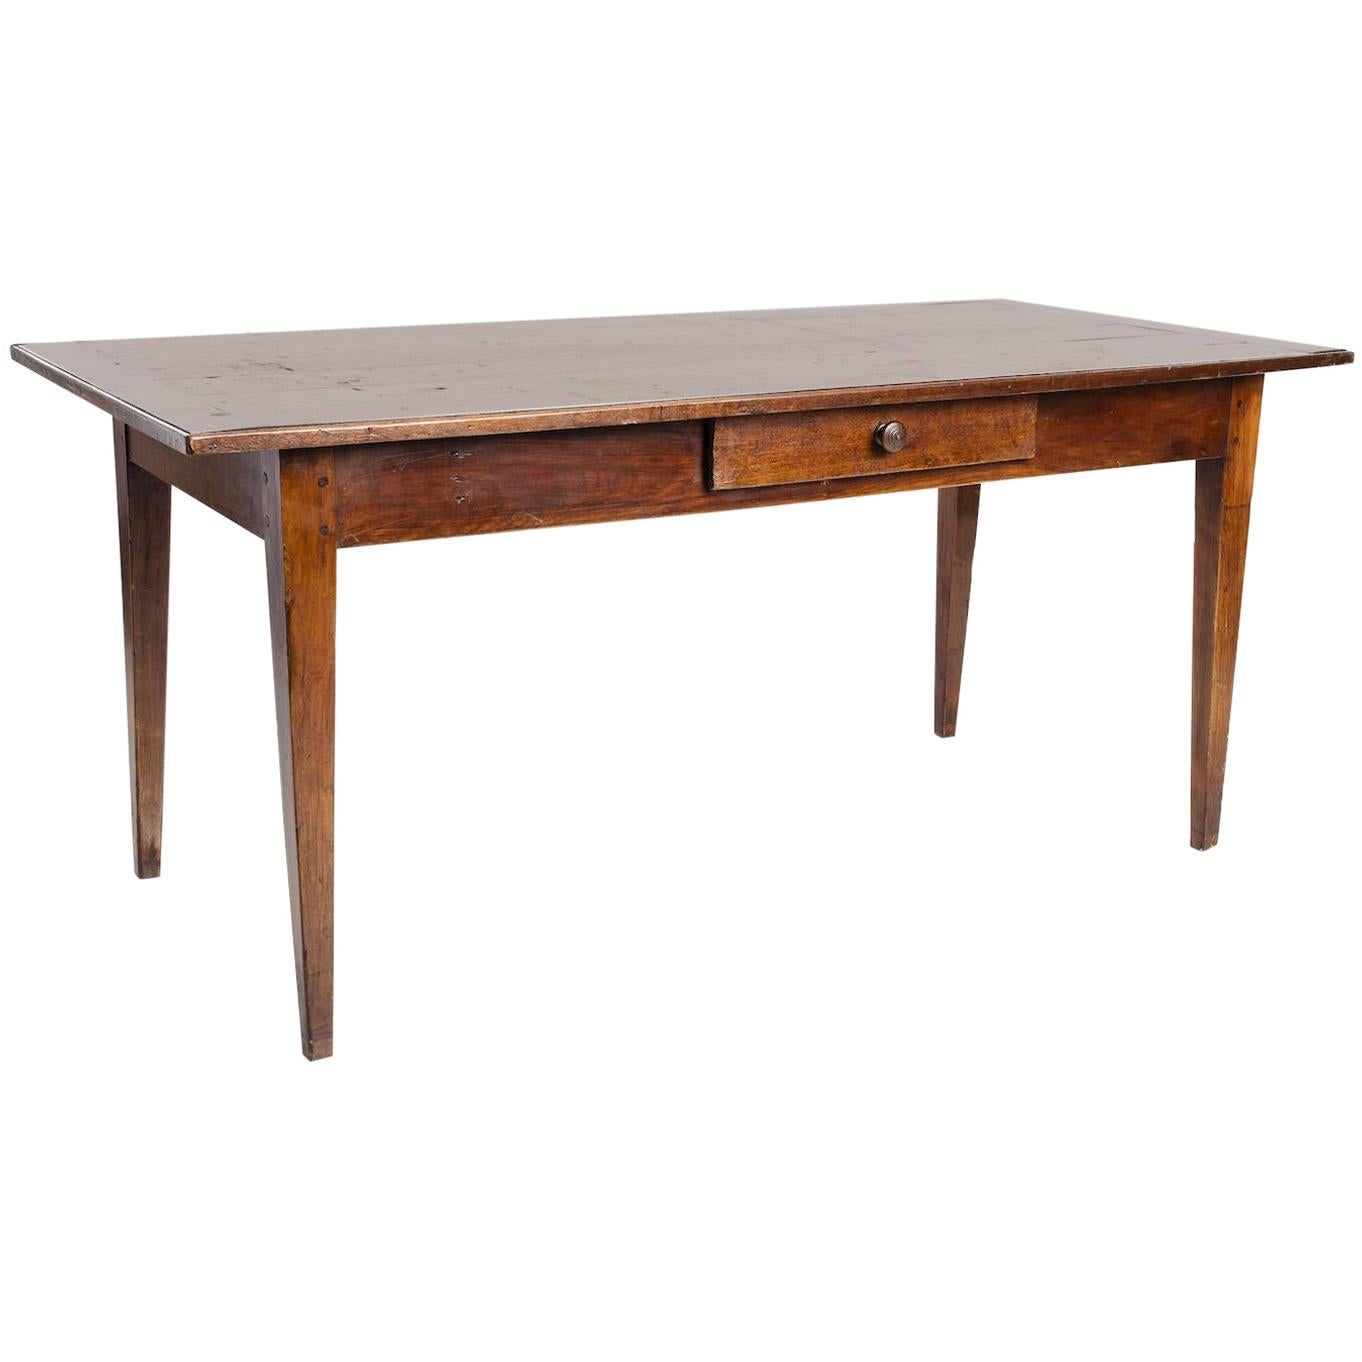 19th Century Antique English Cherrywood Writing Table or Desk